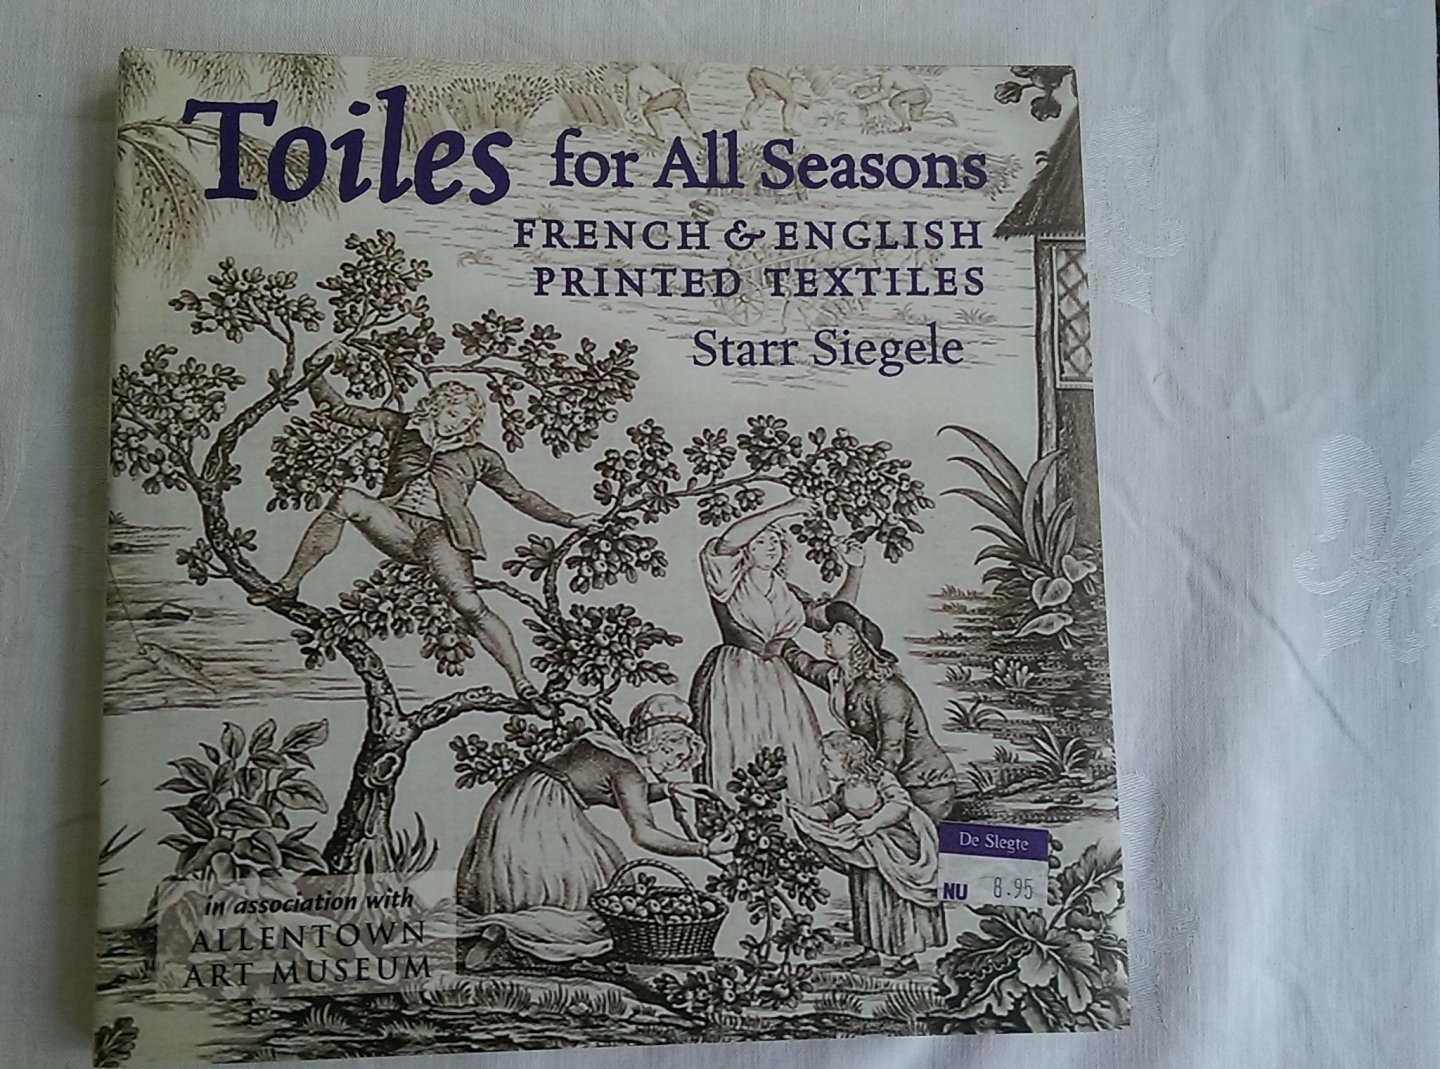 Siegele, Starr - Toiles for All Seasons / French & English Printed Textiles